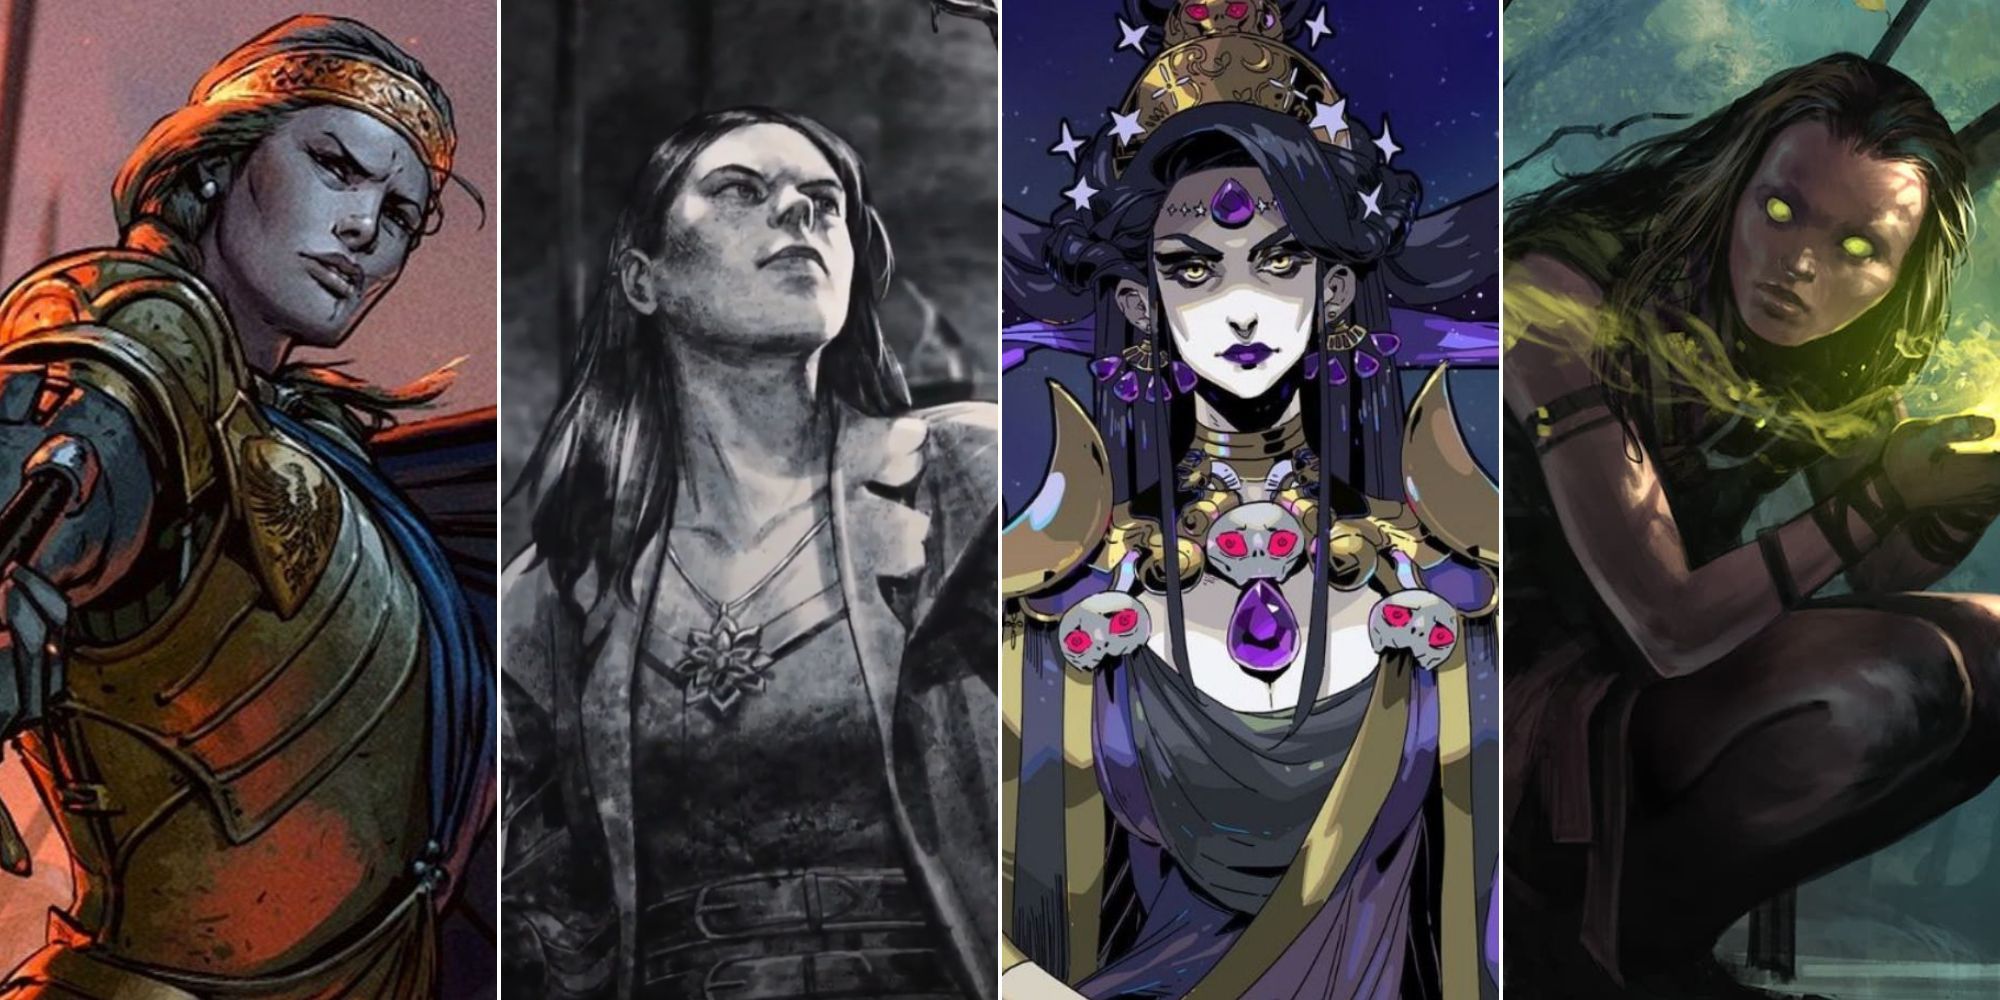 Gwent Rogue Mage split image. Thronebreaker, Gwent Rogue Mage, Hades, Magic the Gathering.